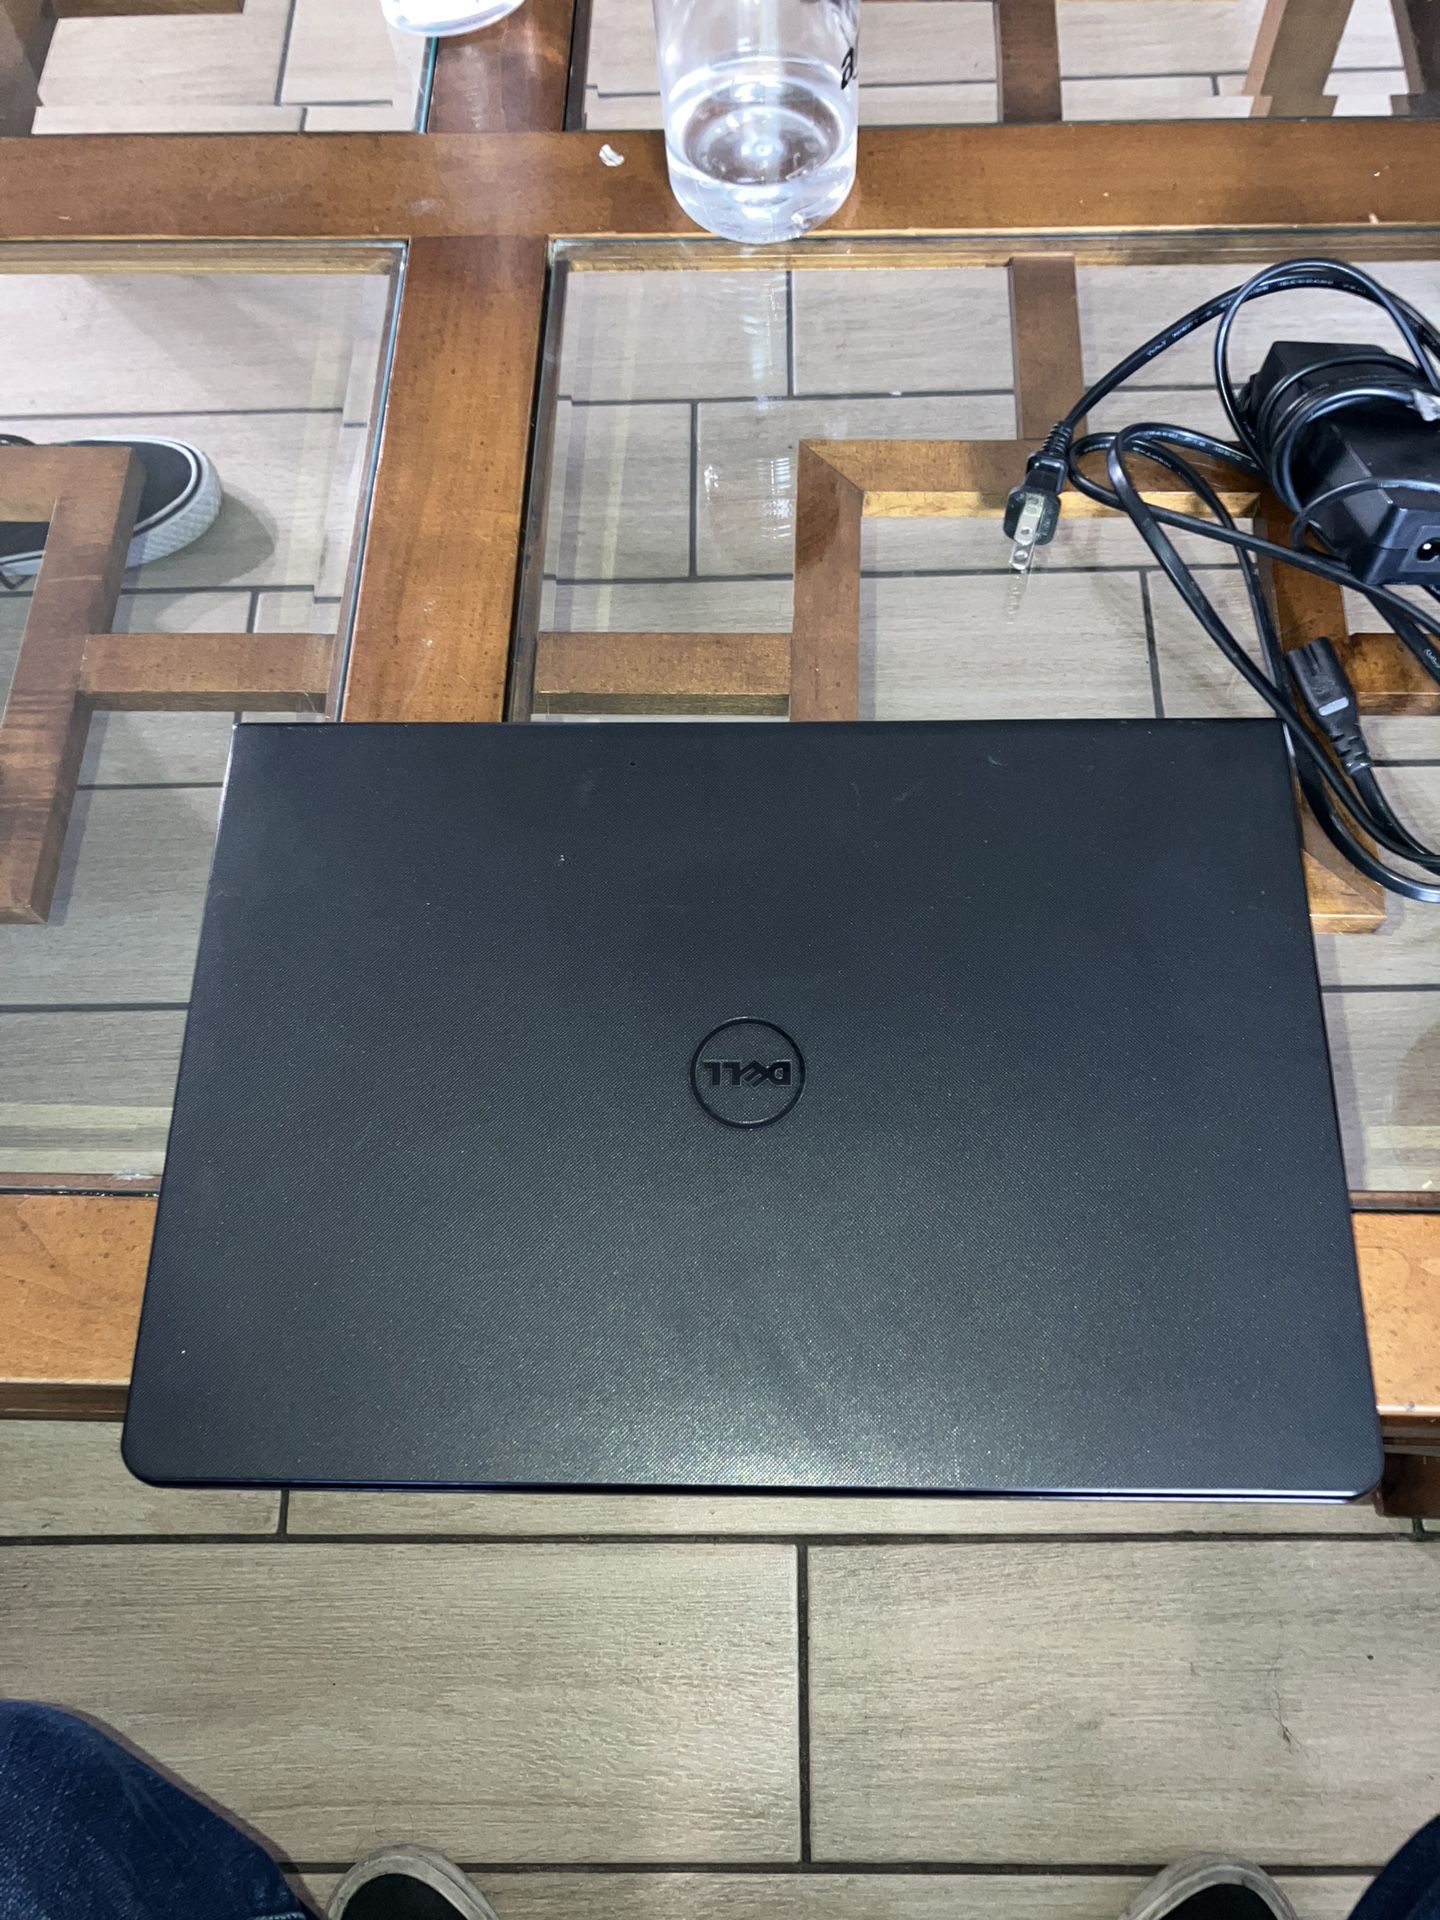 Computer Brand Dell With charger 